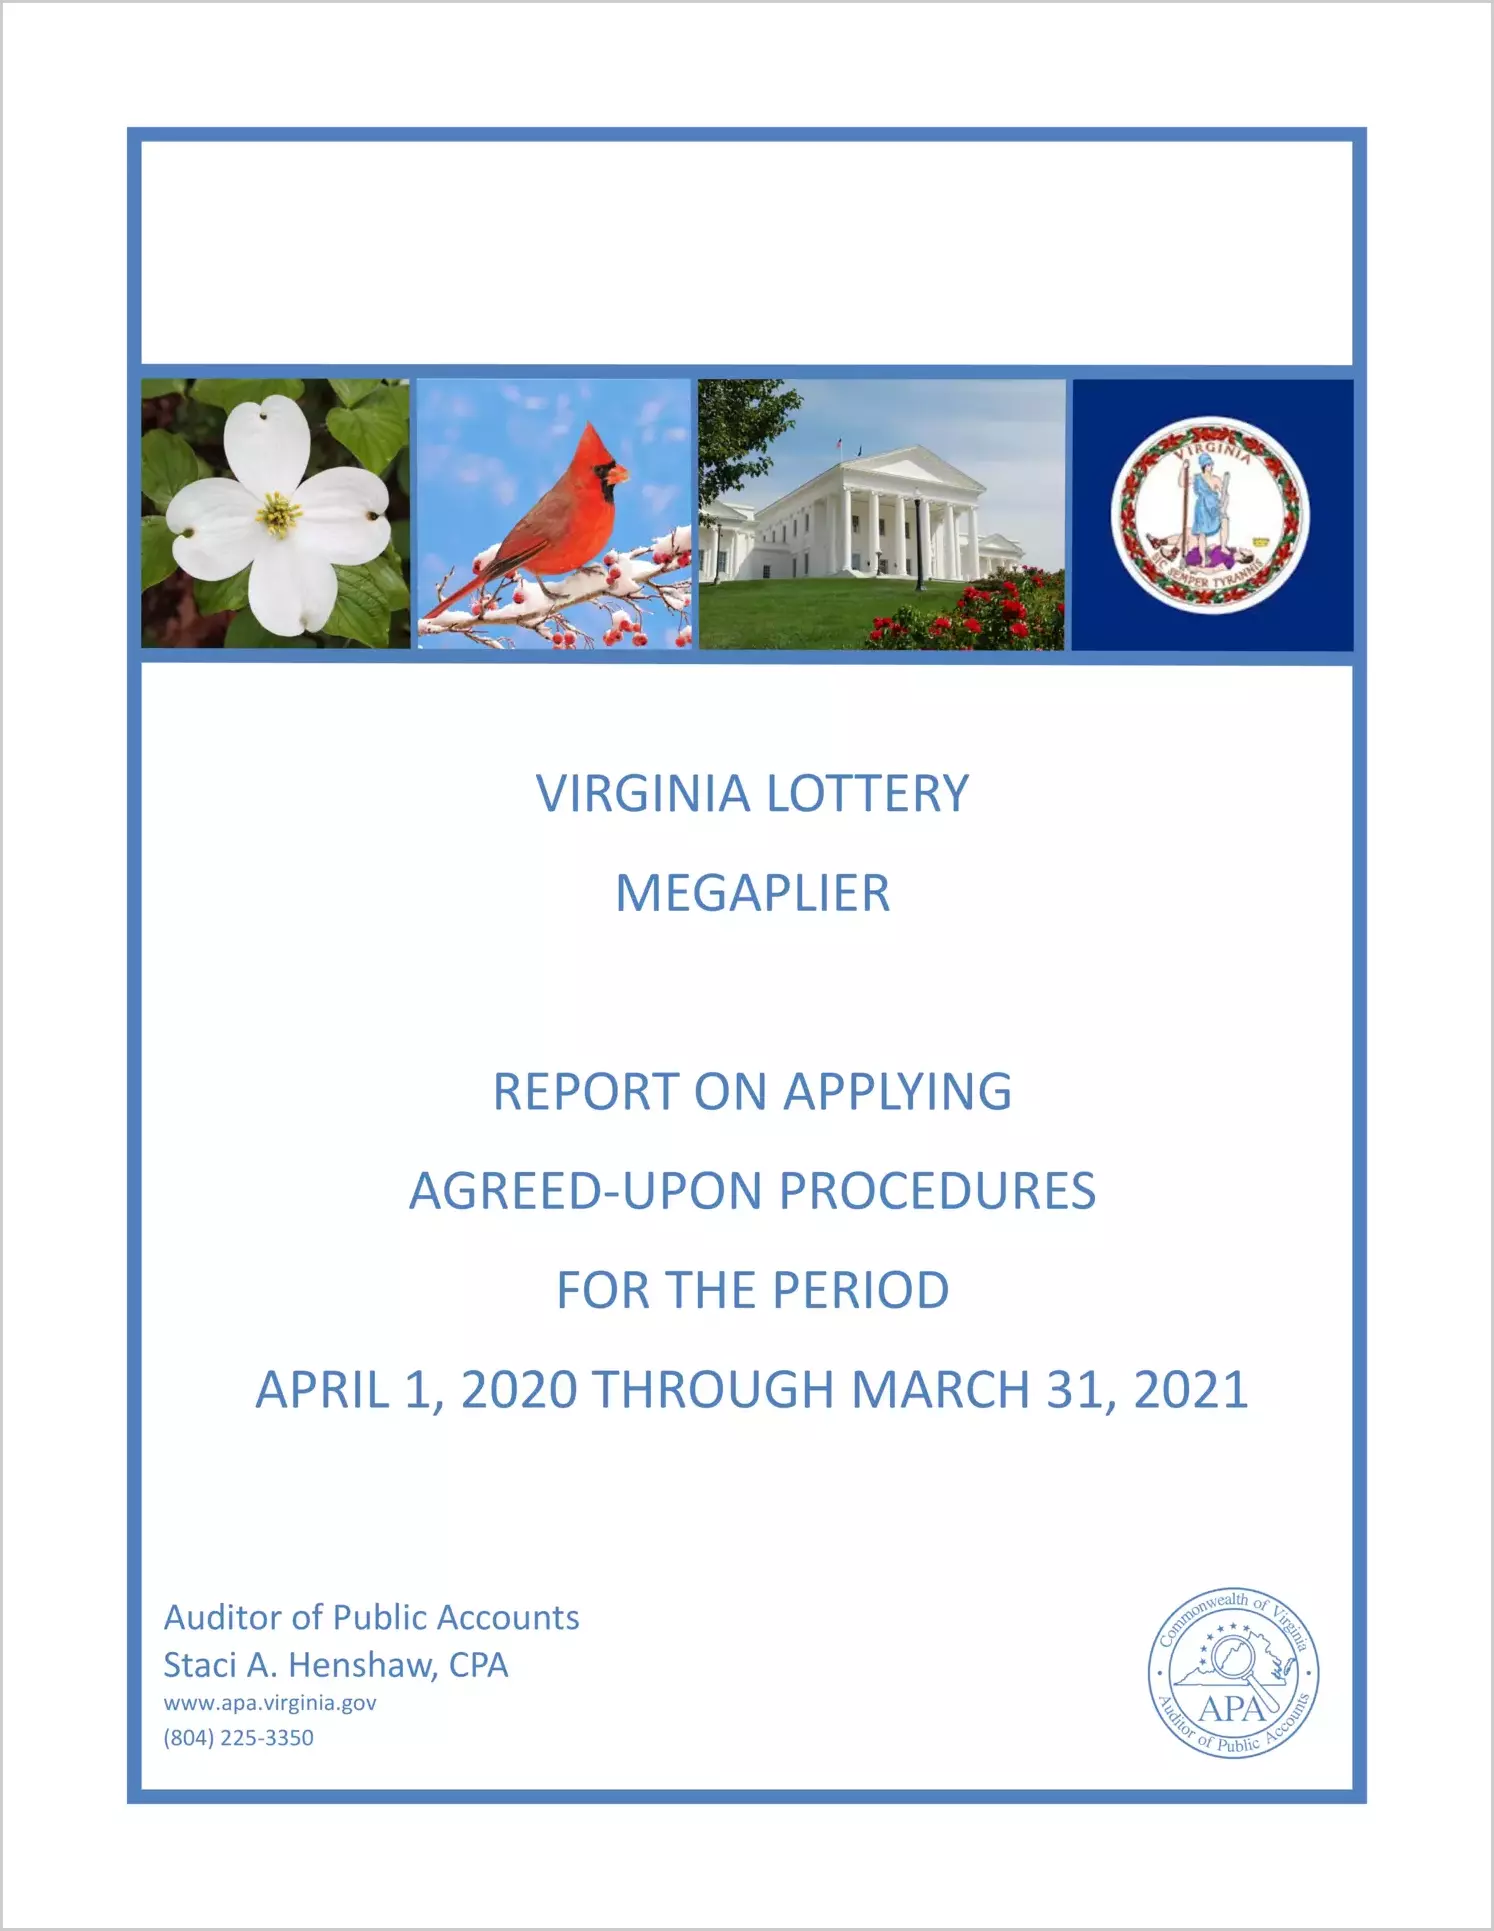 Virginia Lottery Megaplier Report on Applying Agreed-Upon Procedures for the period April 1, 2020 through March 31, 2021